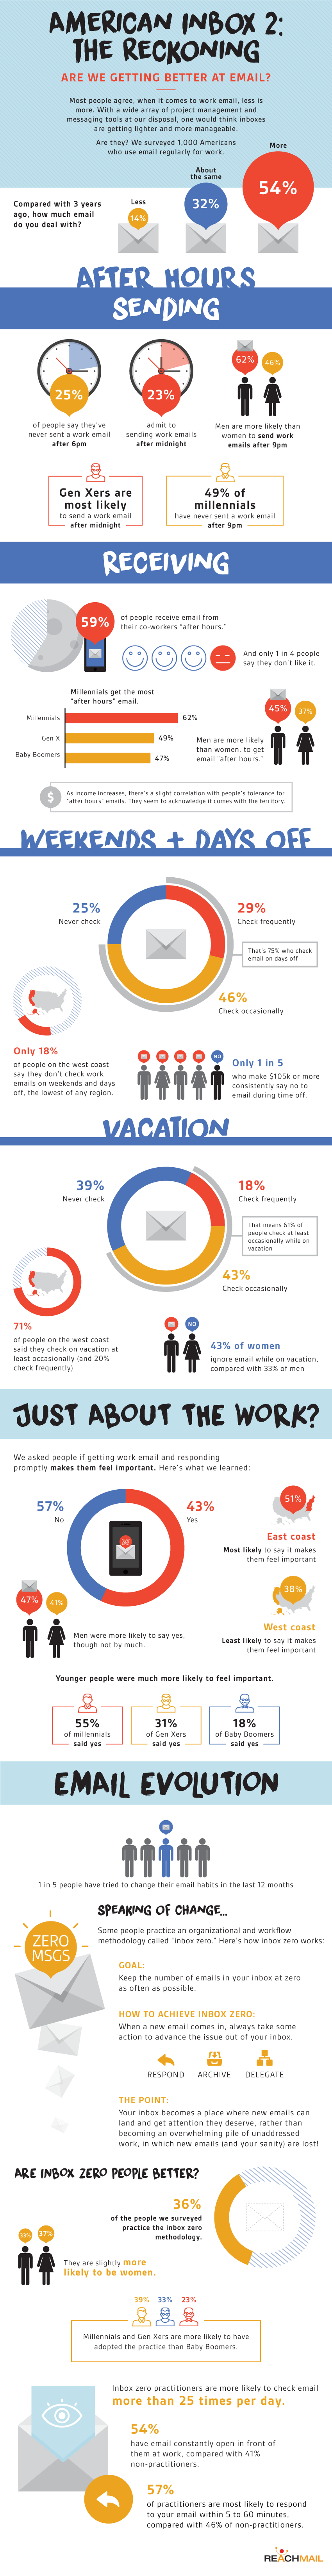 Work Email Trends After Hours